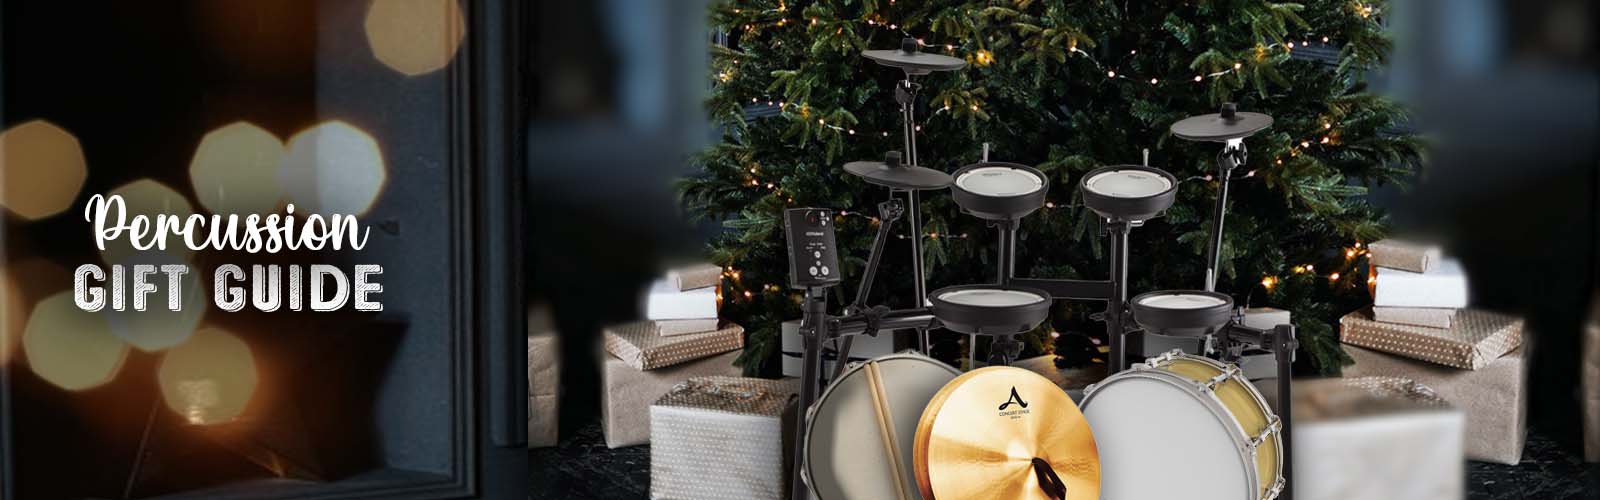 Percussion Gift Guide Banner